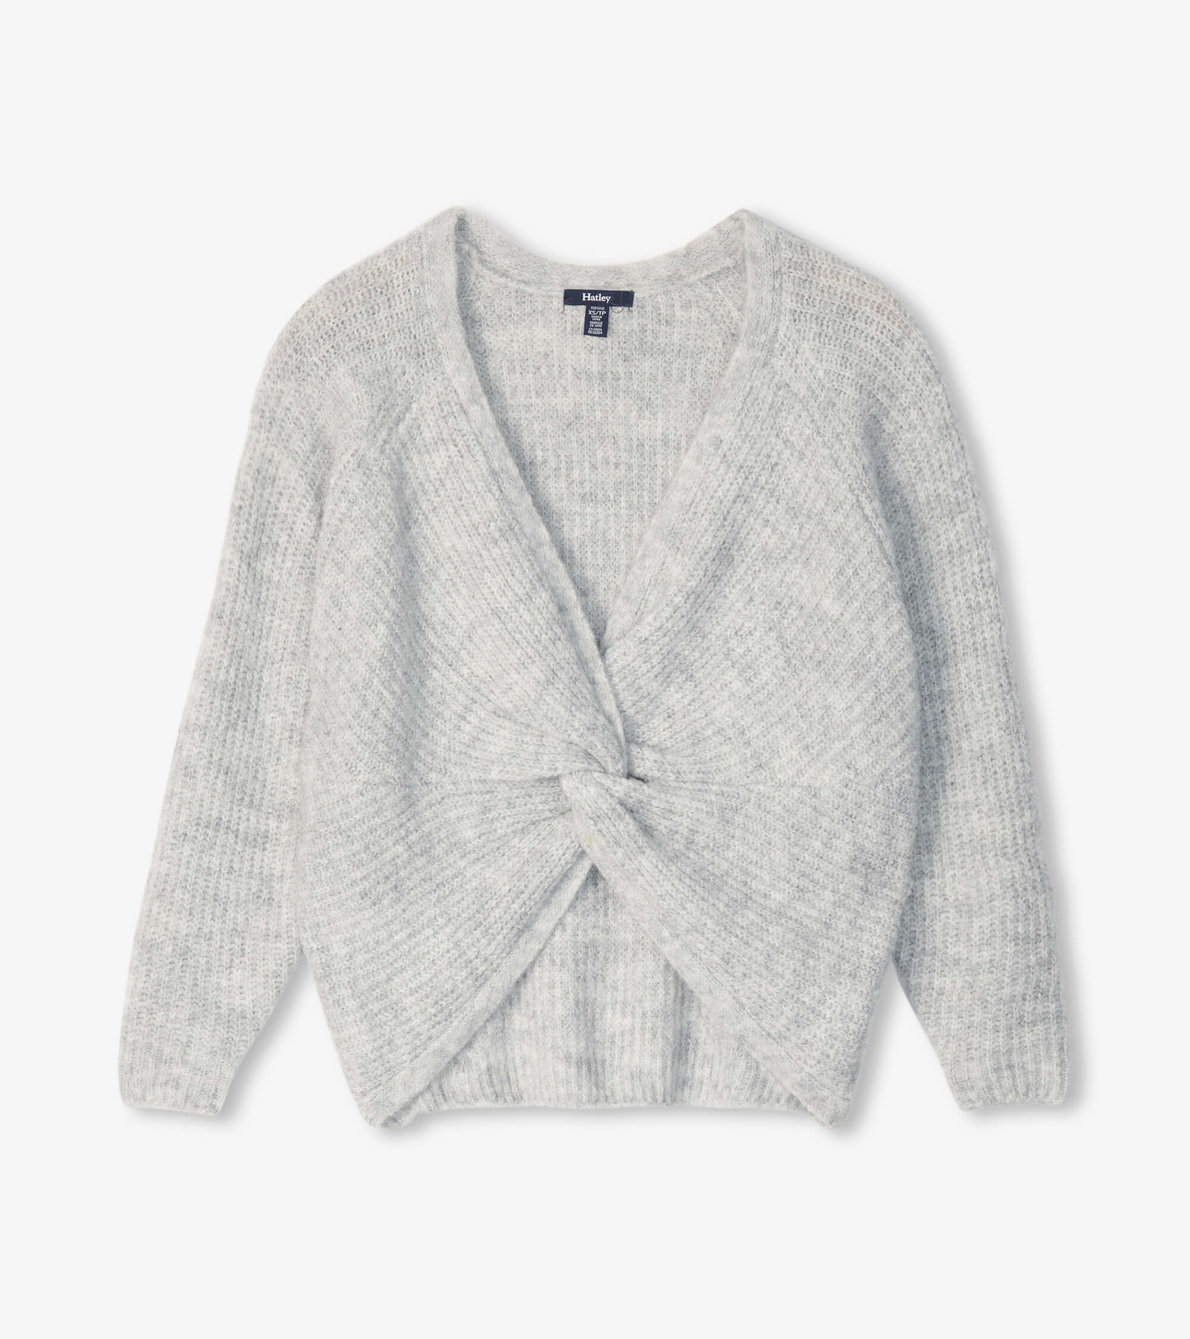 View larger image of Cross Over Sweater - Grey Melange